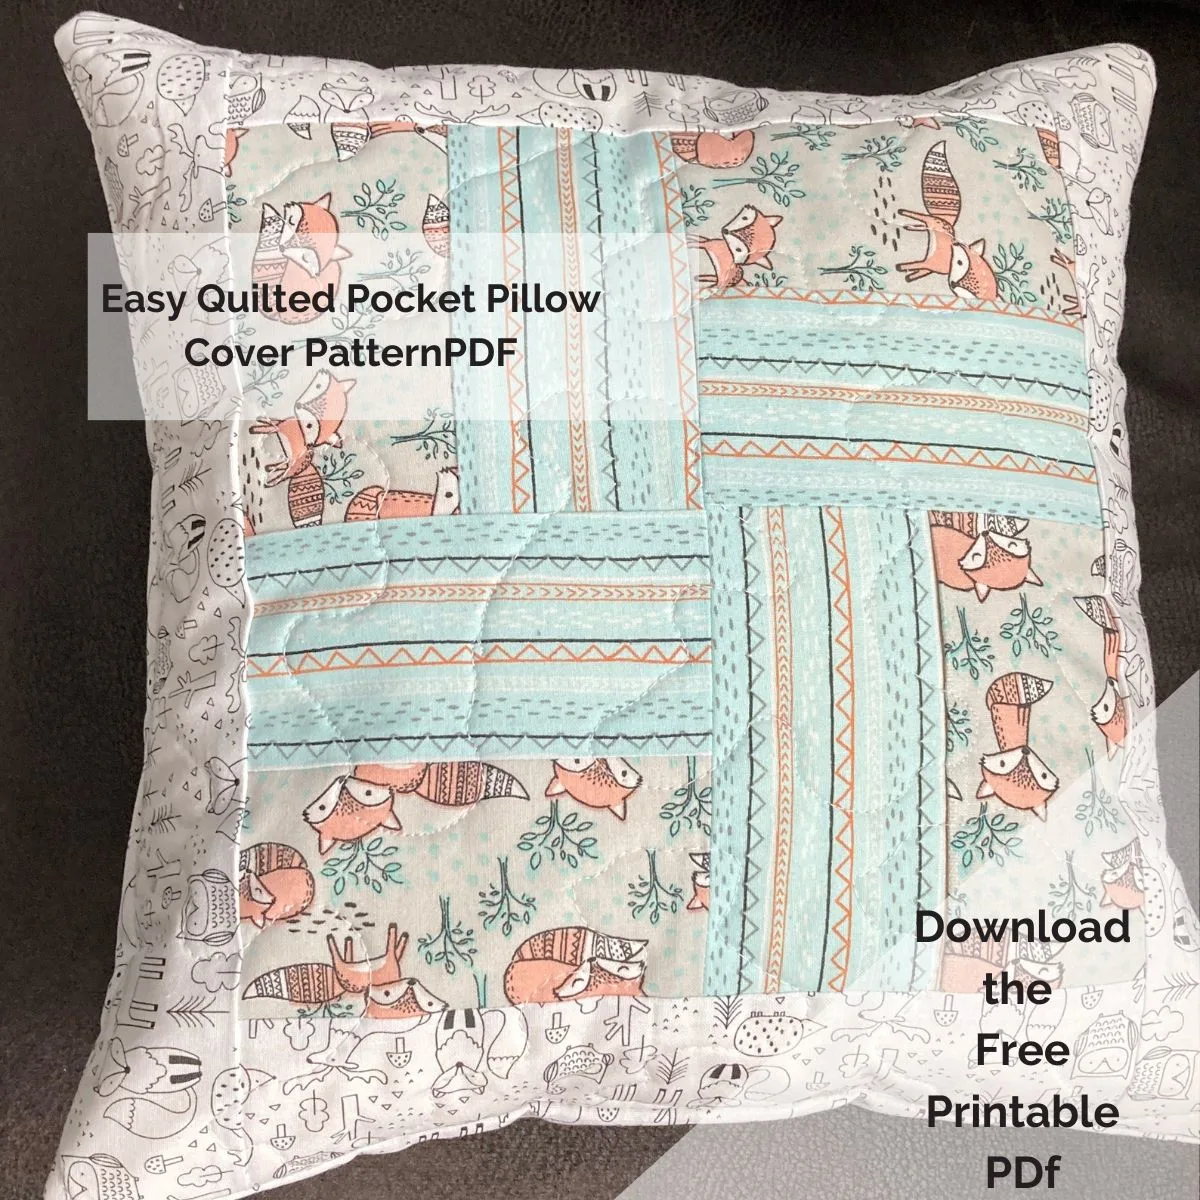 Easy Quilted Pocket Pillow Cover Pattern PDF